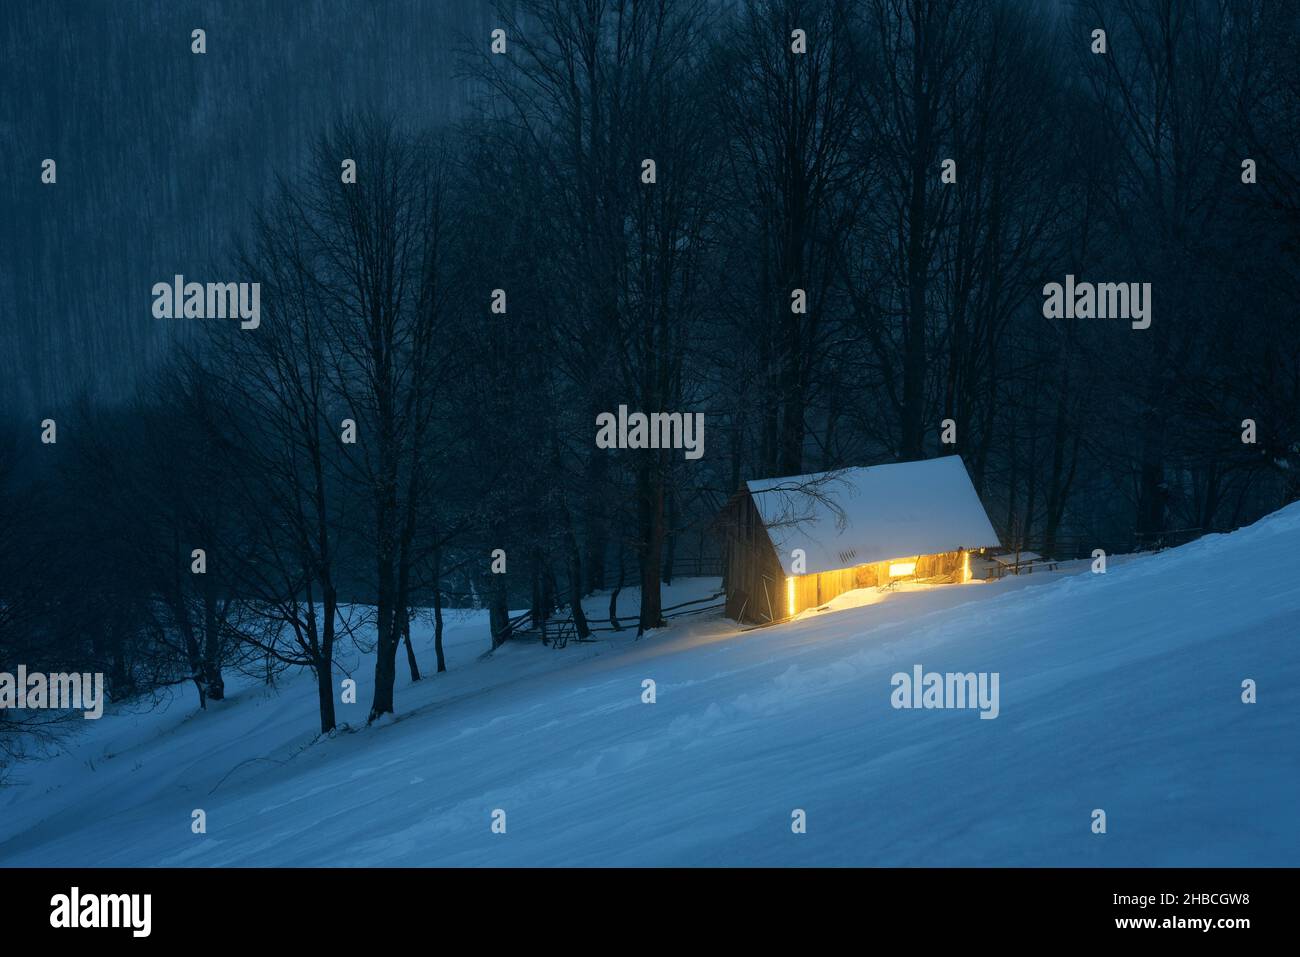 Night landscape with a house in a winter snowy forest Stock Photo